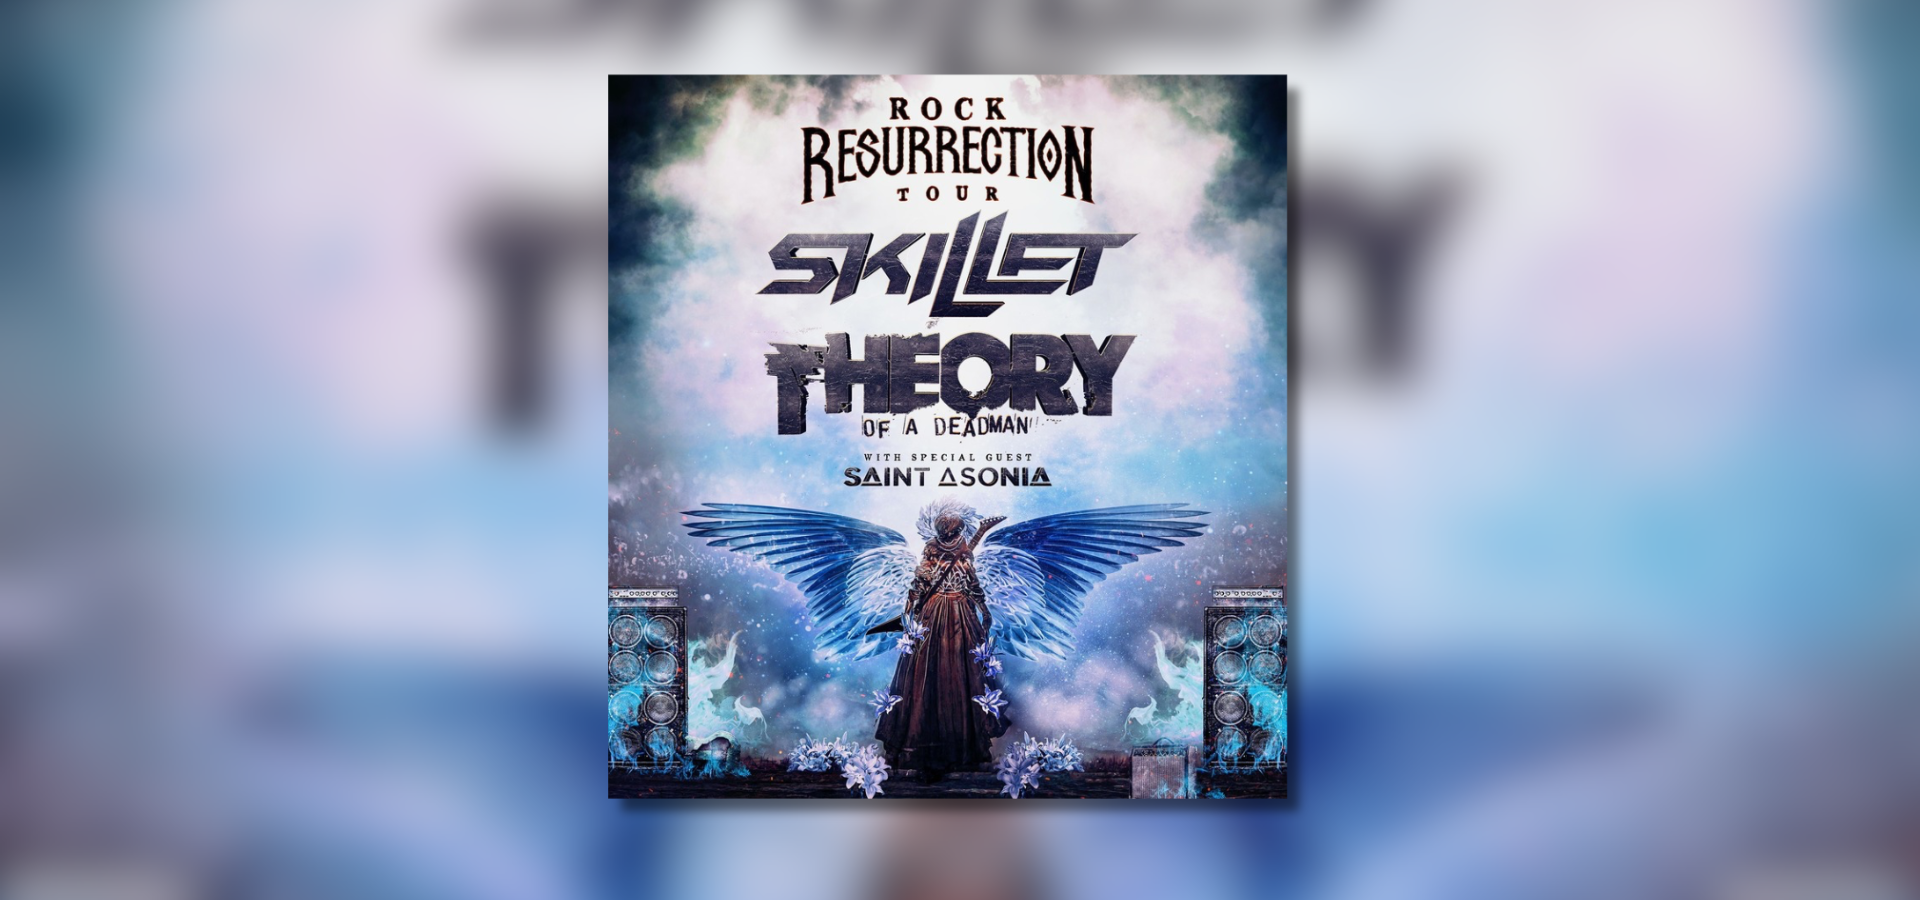 Skillet And Theory Of A Deadman Announce Fall Rock Resurrection Tour